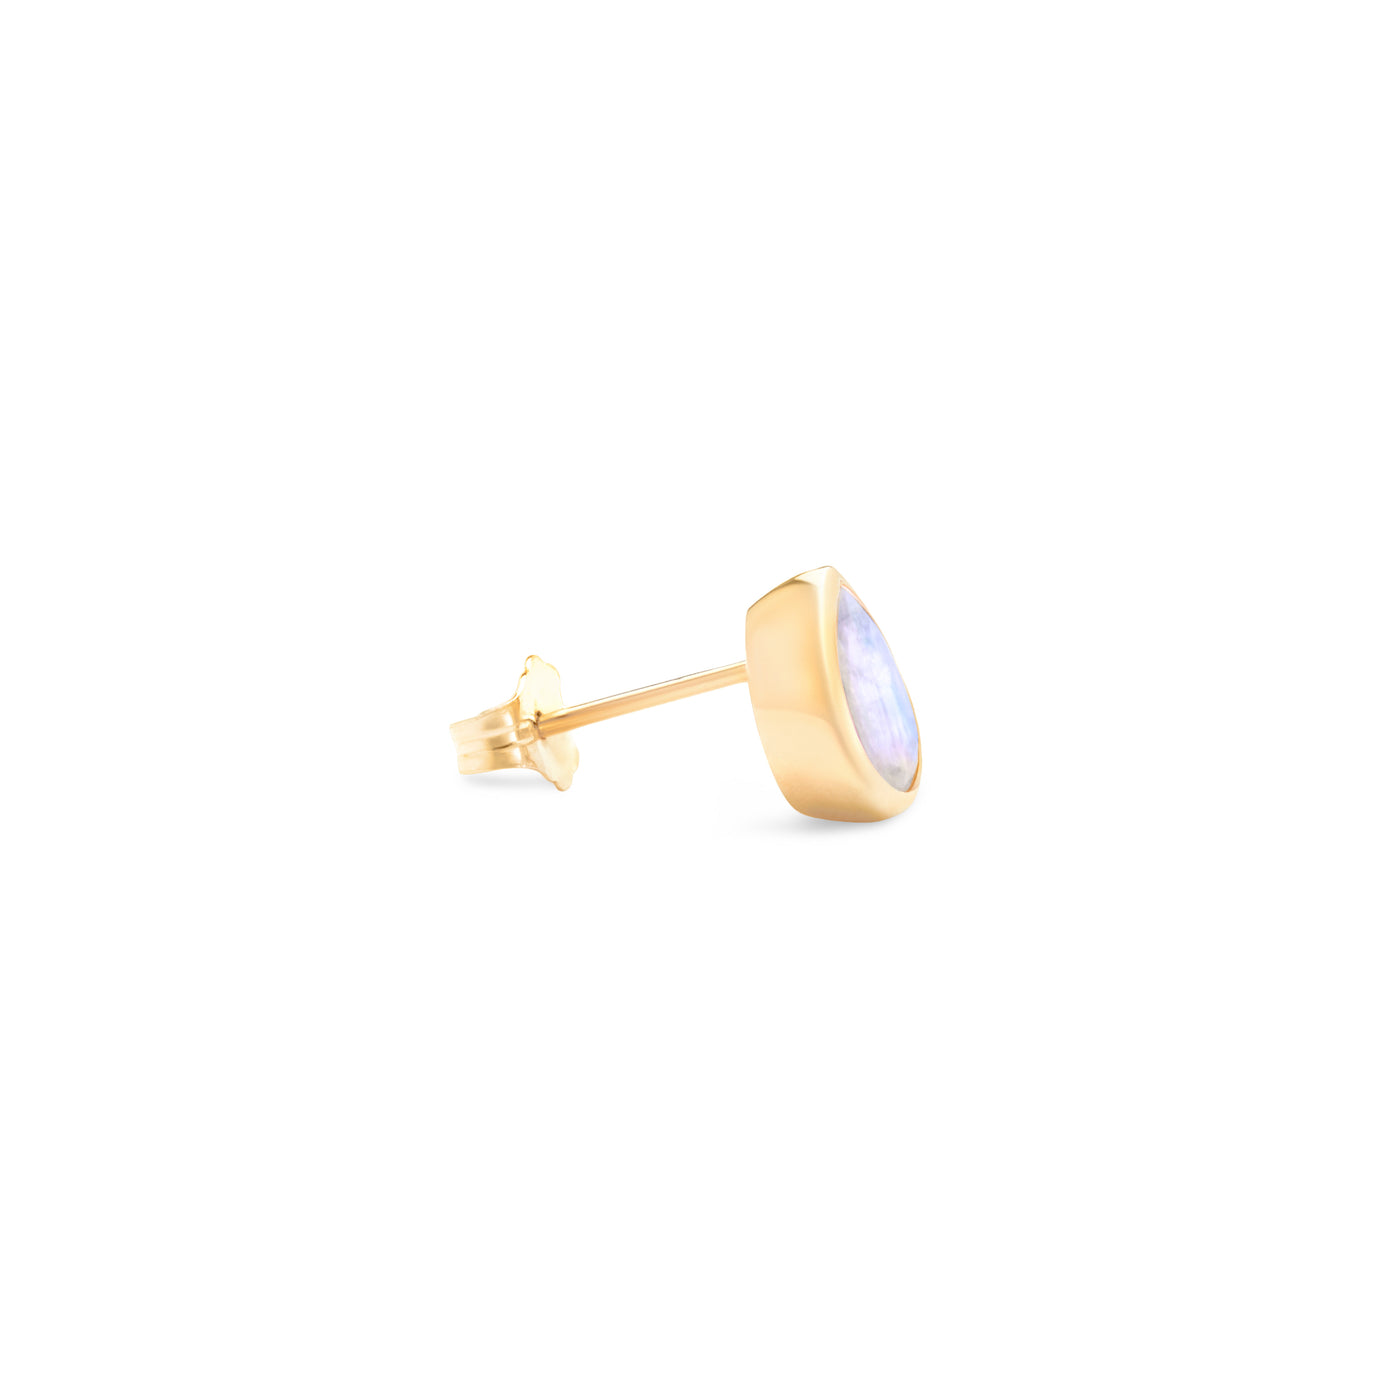 14 Karat Yellow Gold Stud Earring with Pear Shaped Moonstone Against White Background Turned for Side View